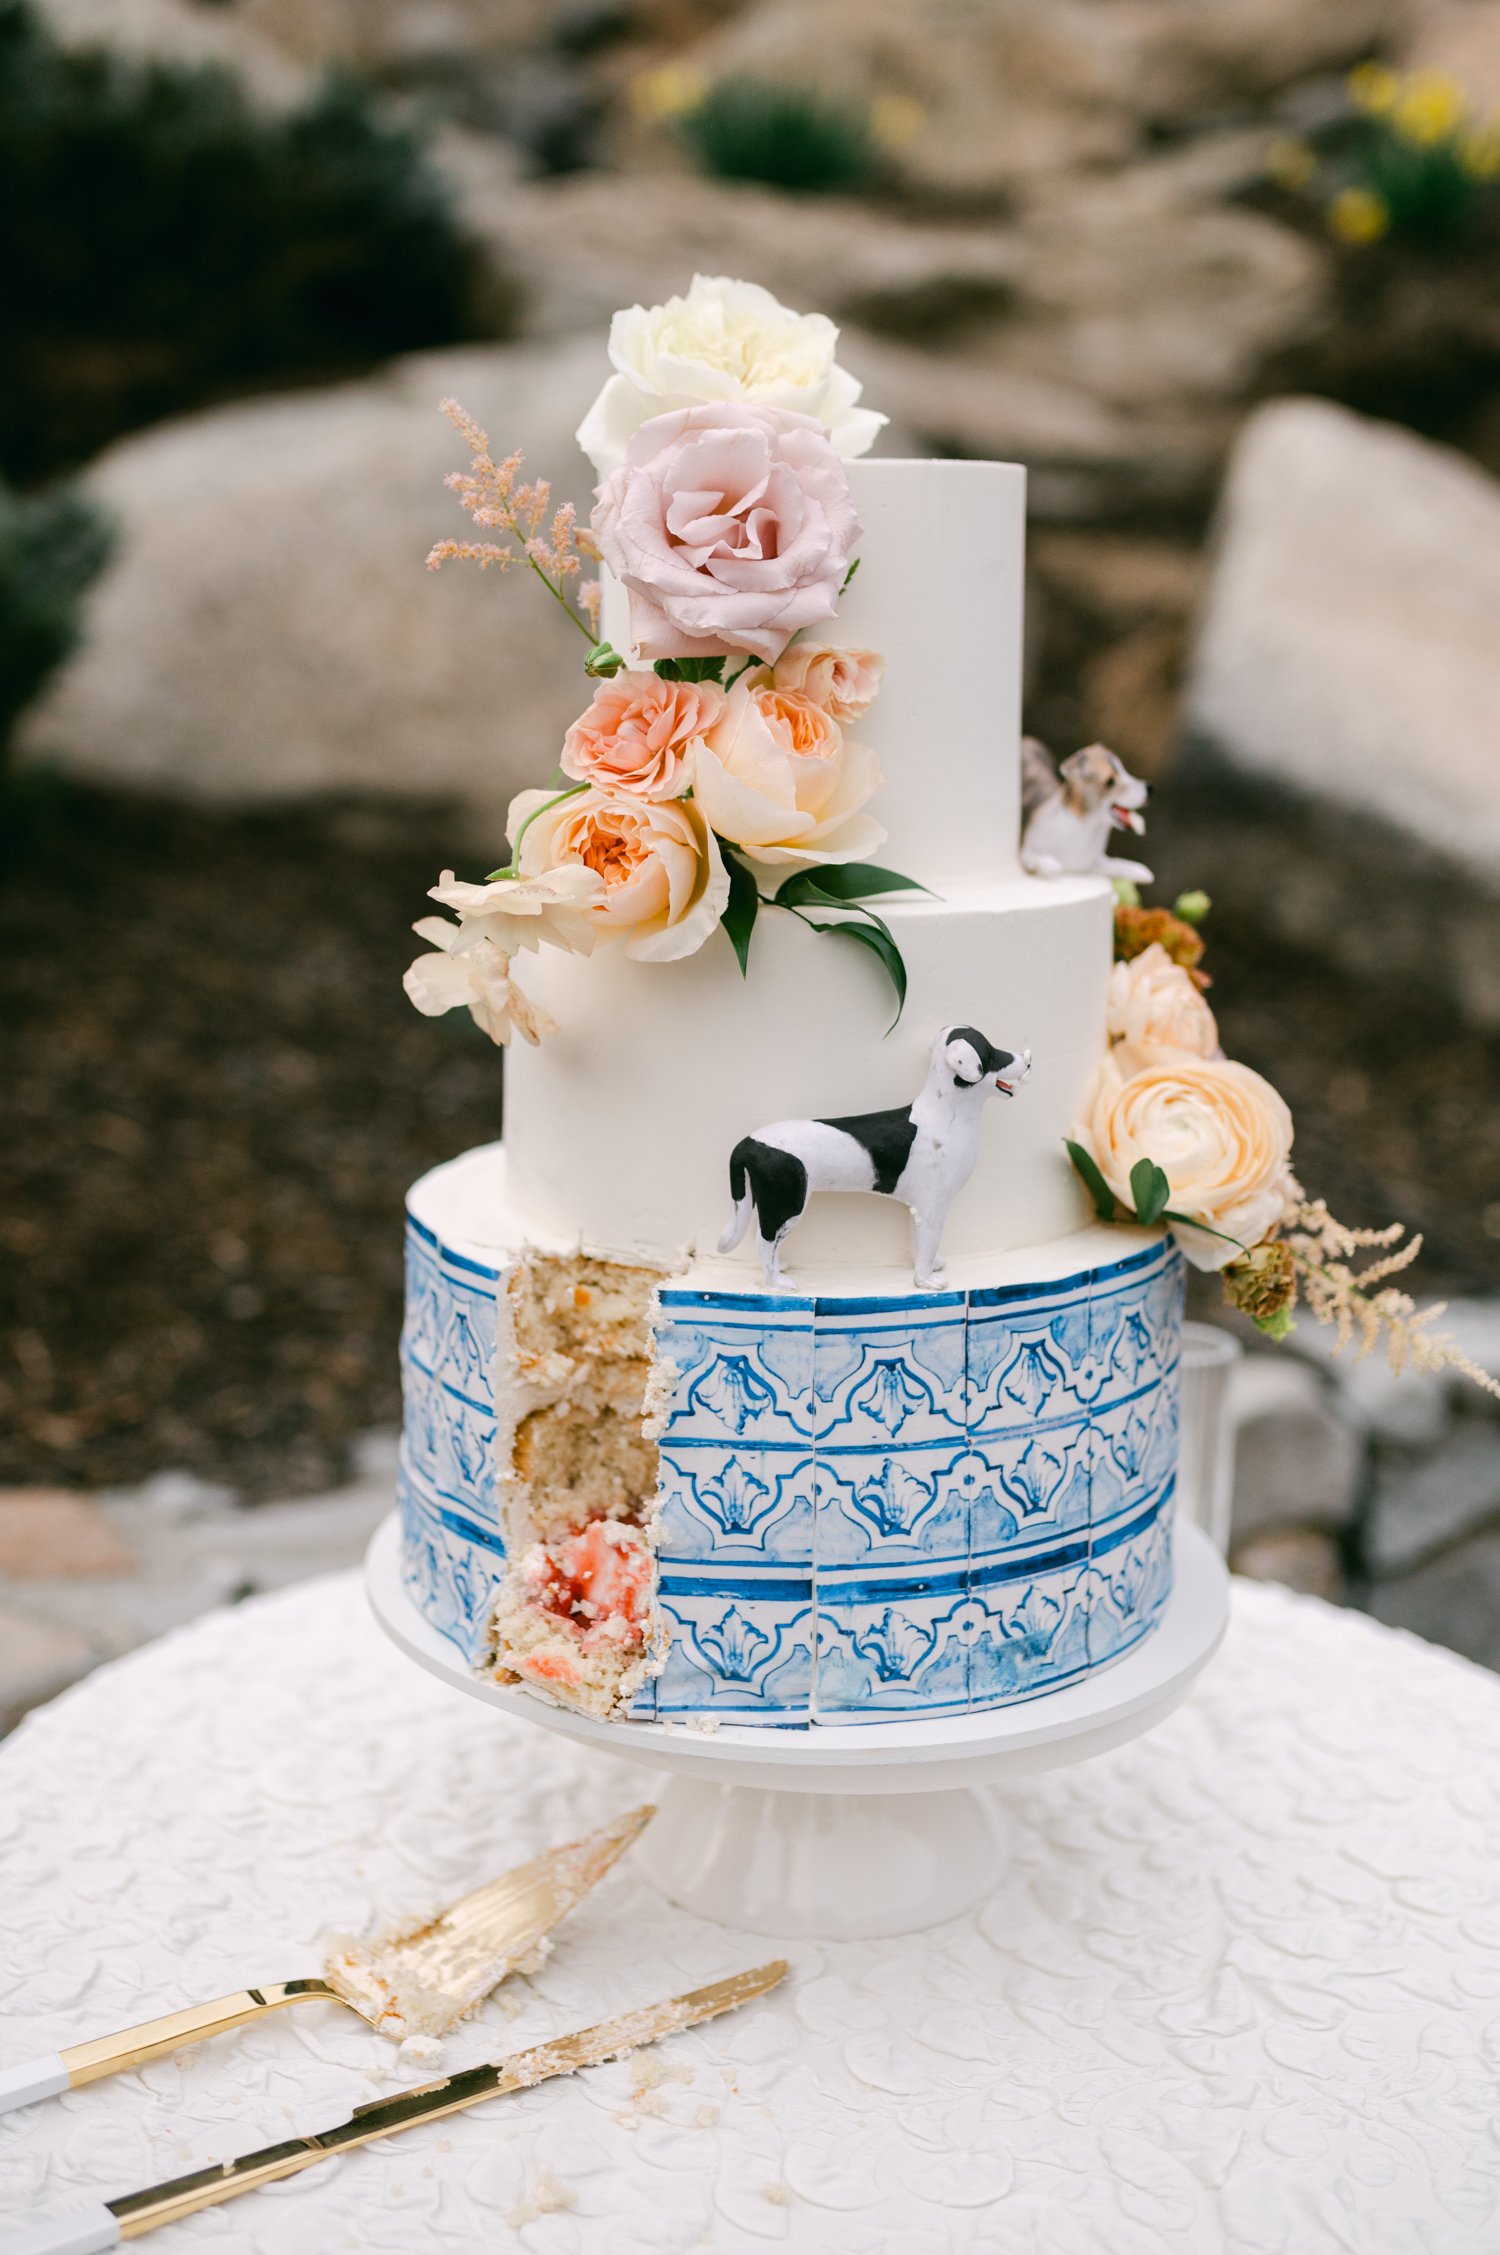 Everyone Resort &amp; Spa Wedding Venue, photo of a wedding cake with a dog taking a bite